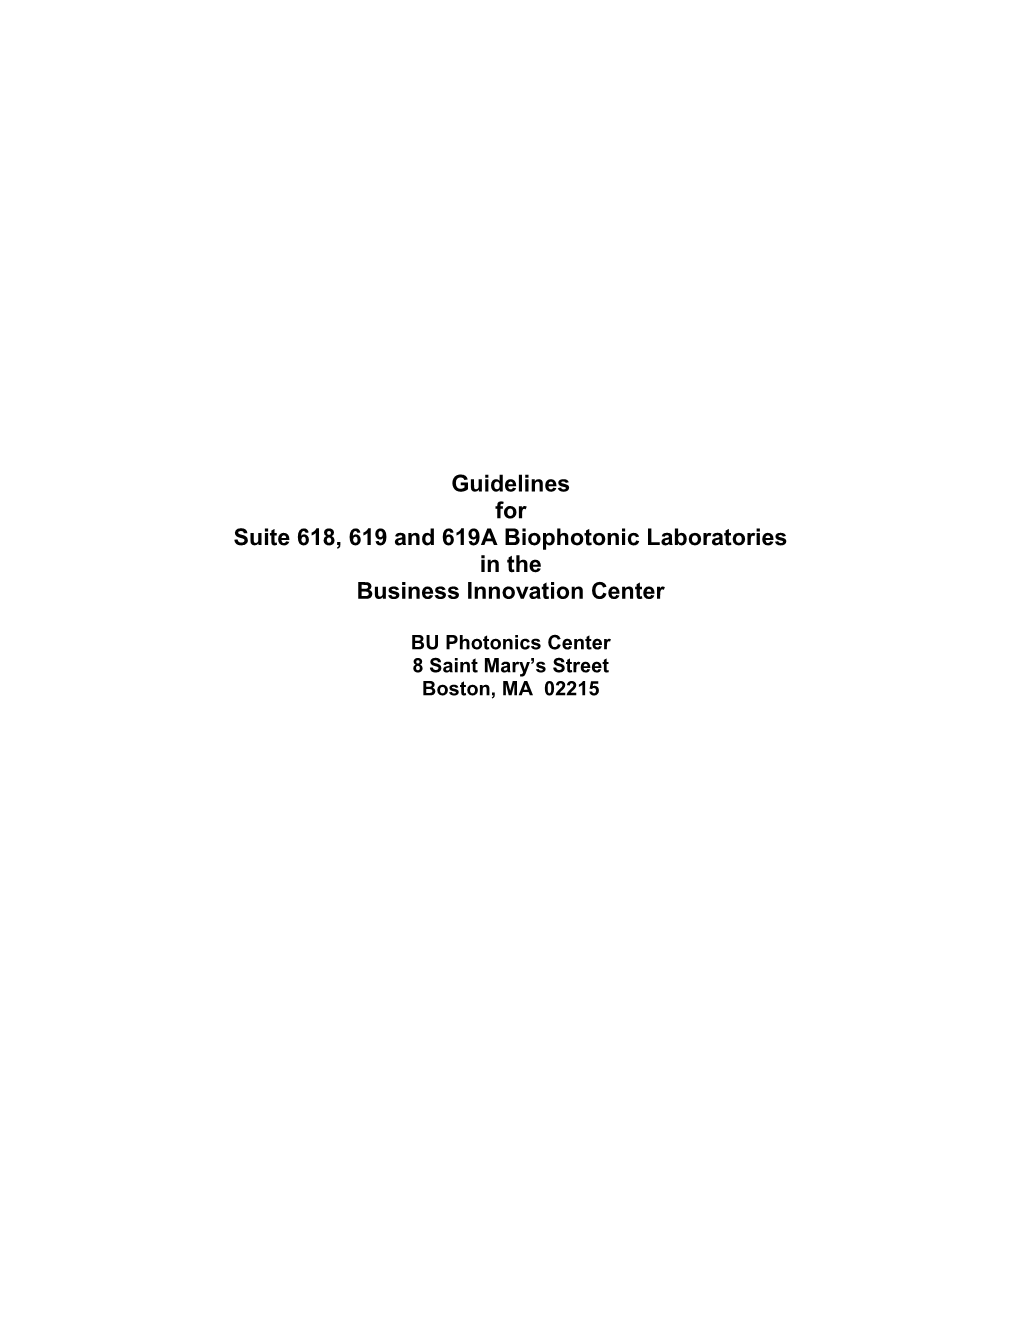 Suite 618, 619 and 619A Biophotonic Laboratories